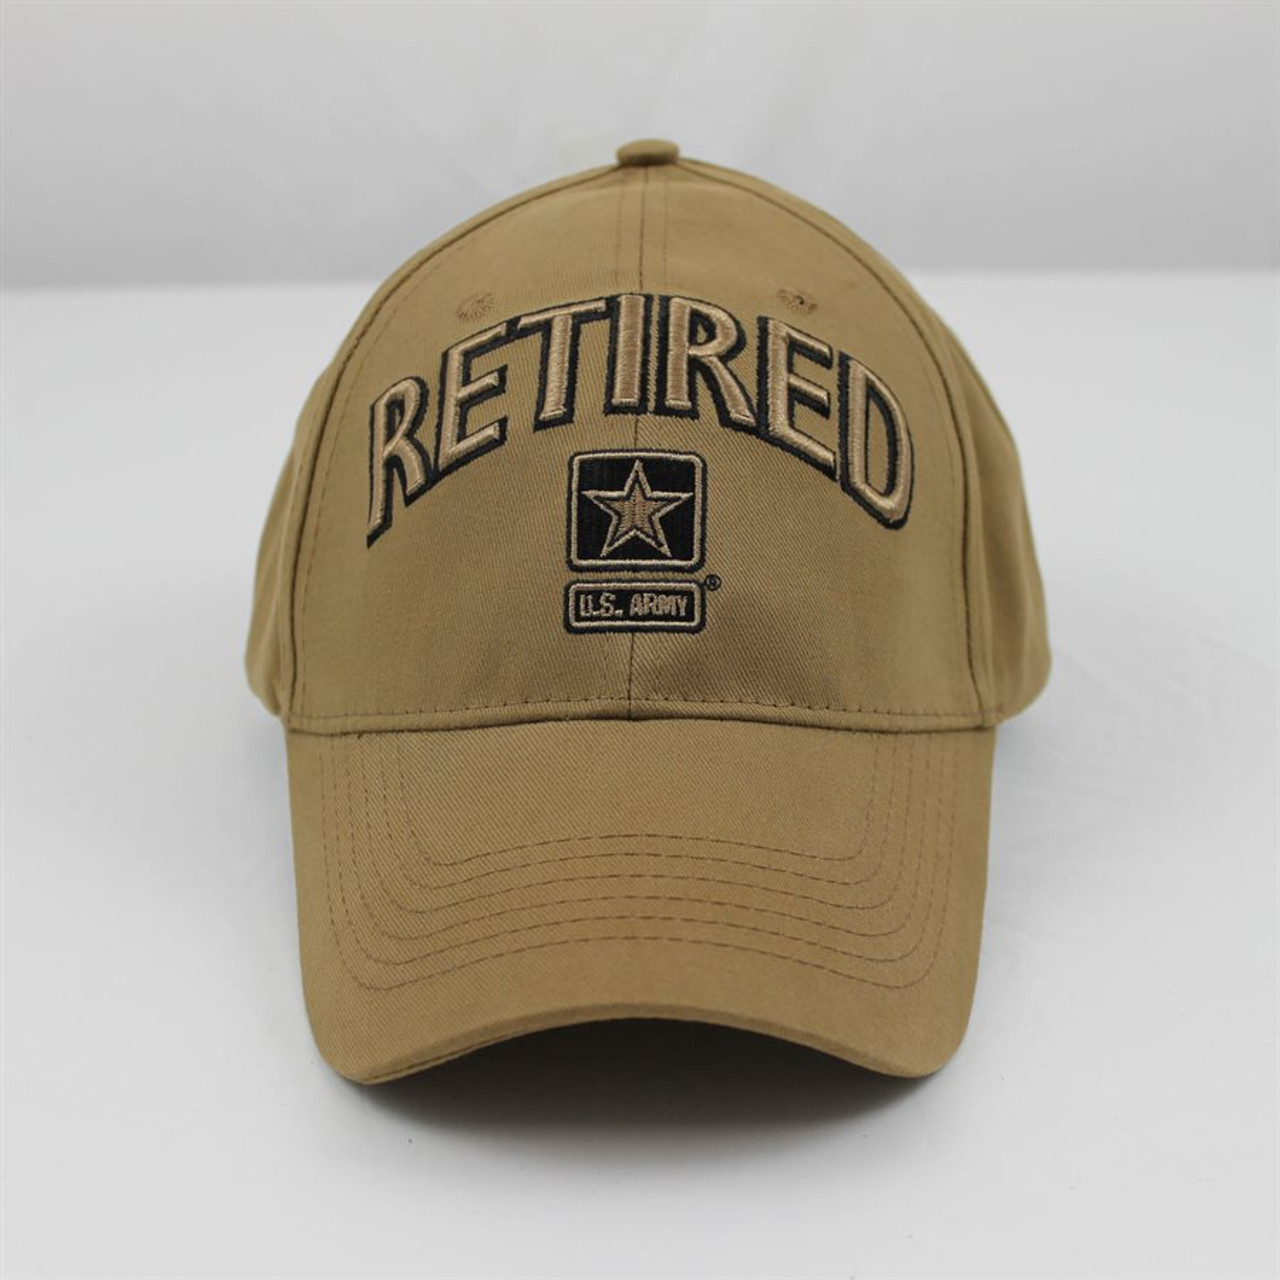 6634 - Army Retired Cap - Star Logo - Cotton - Coyote